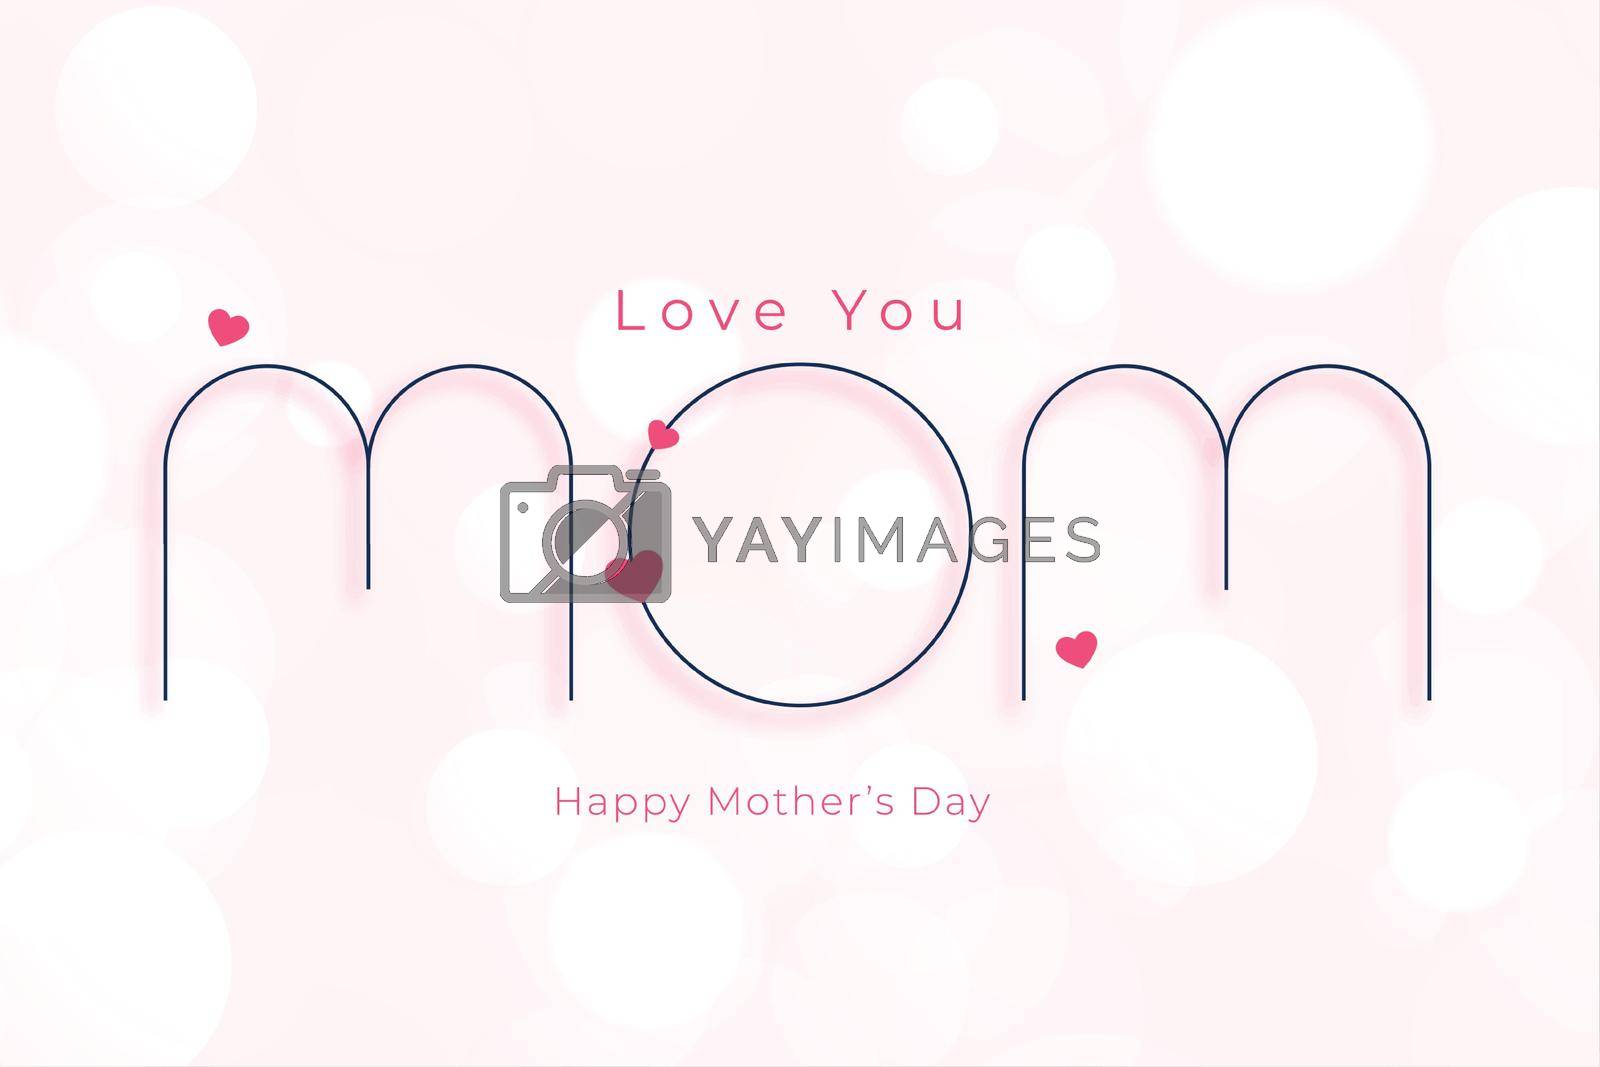 Royalty free image of minimal style mother's day line style card design by mstjahanara